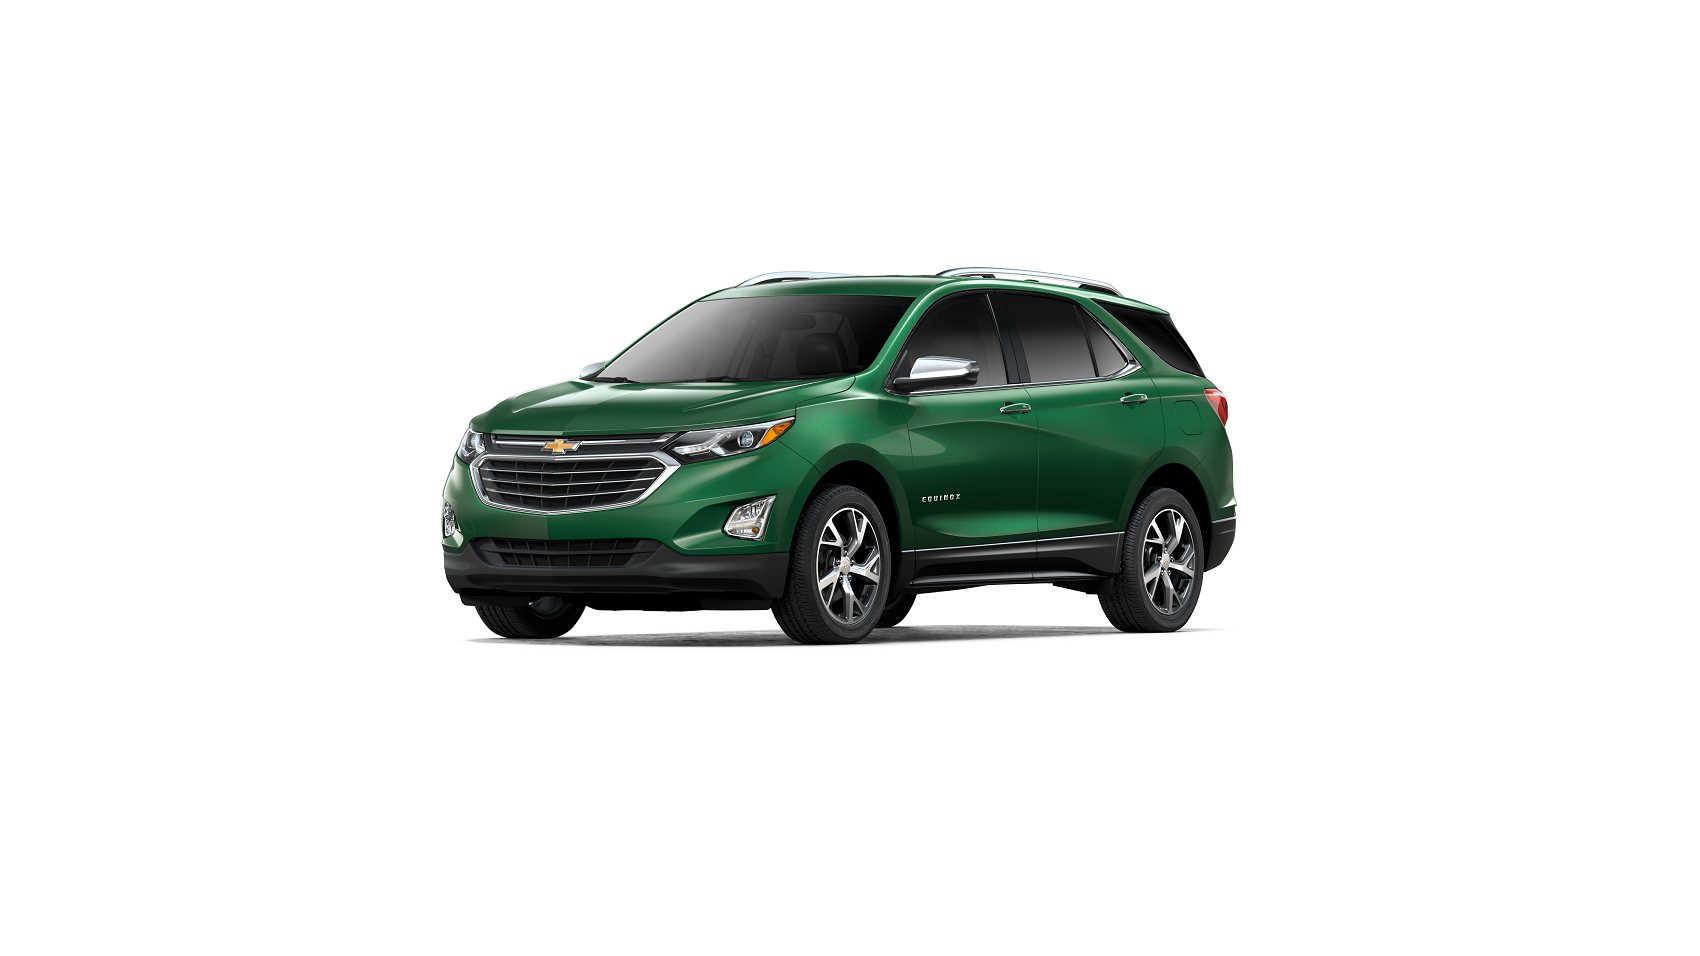 Chevy Equinox for Sale in Highland MI